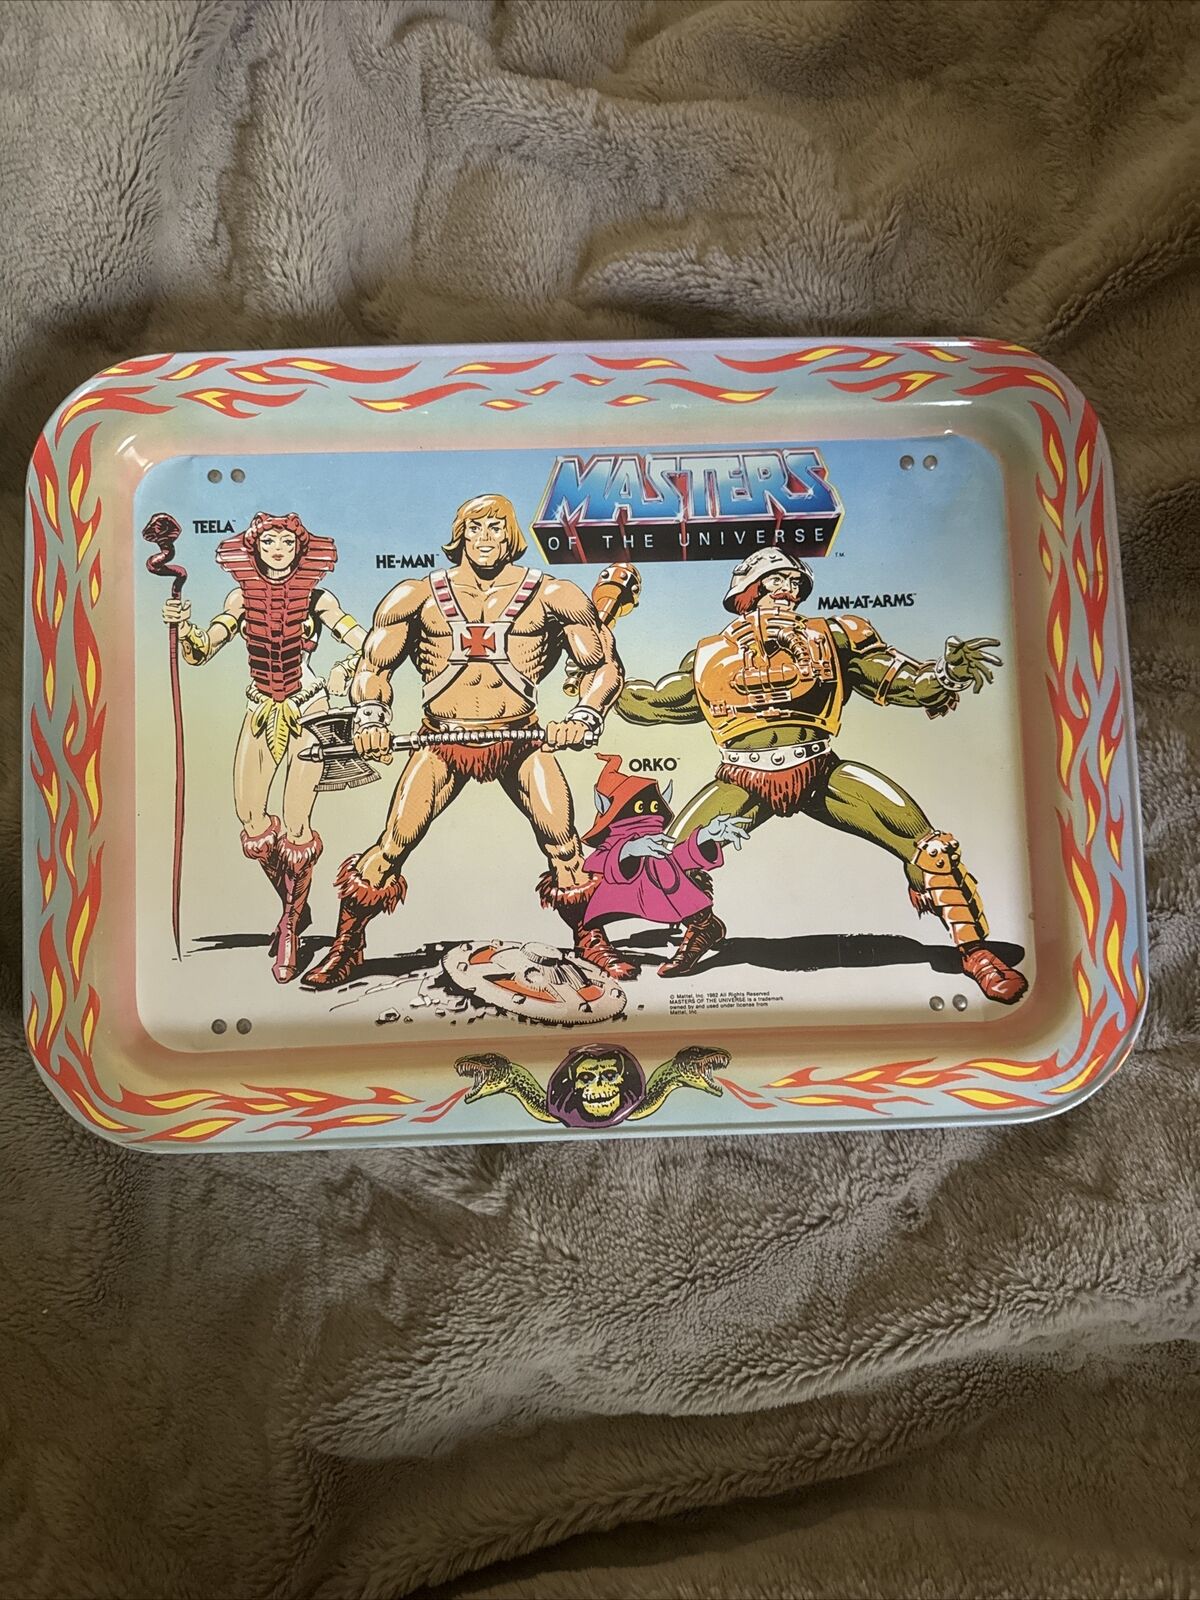 Vintage 1982 Mattel He-man  Masters Of The Universe TV Dinner Tray